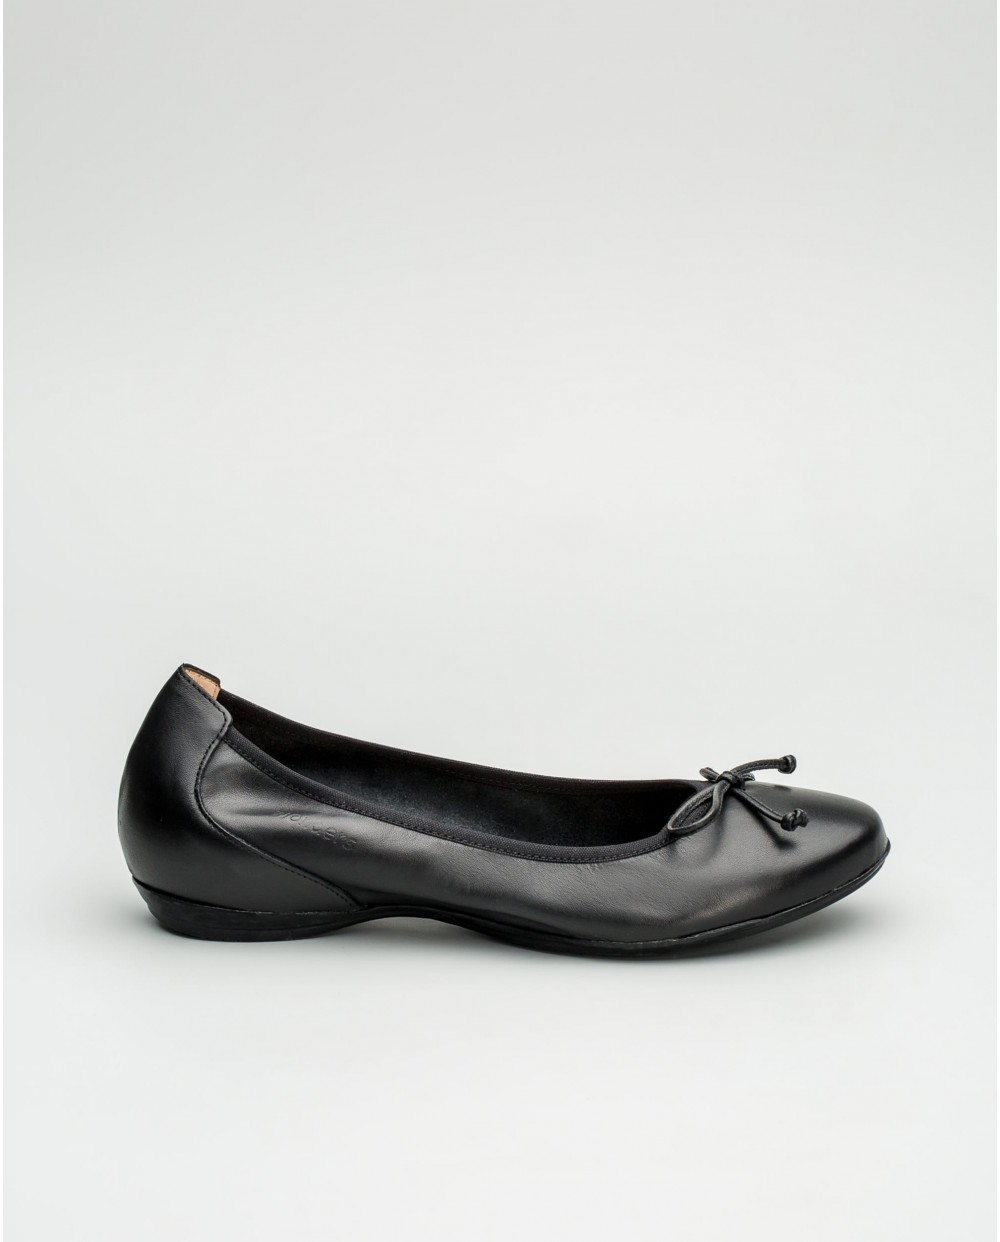 Wonders-Flat Shoes-Leather ballet pump with bow